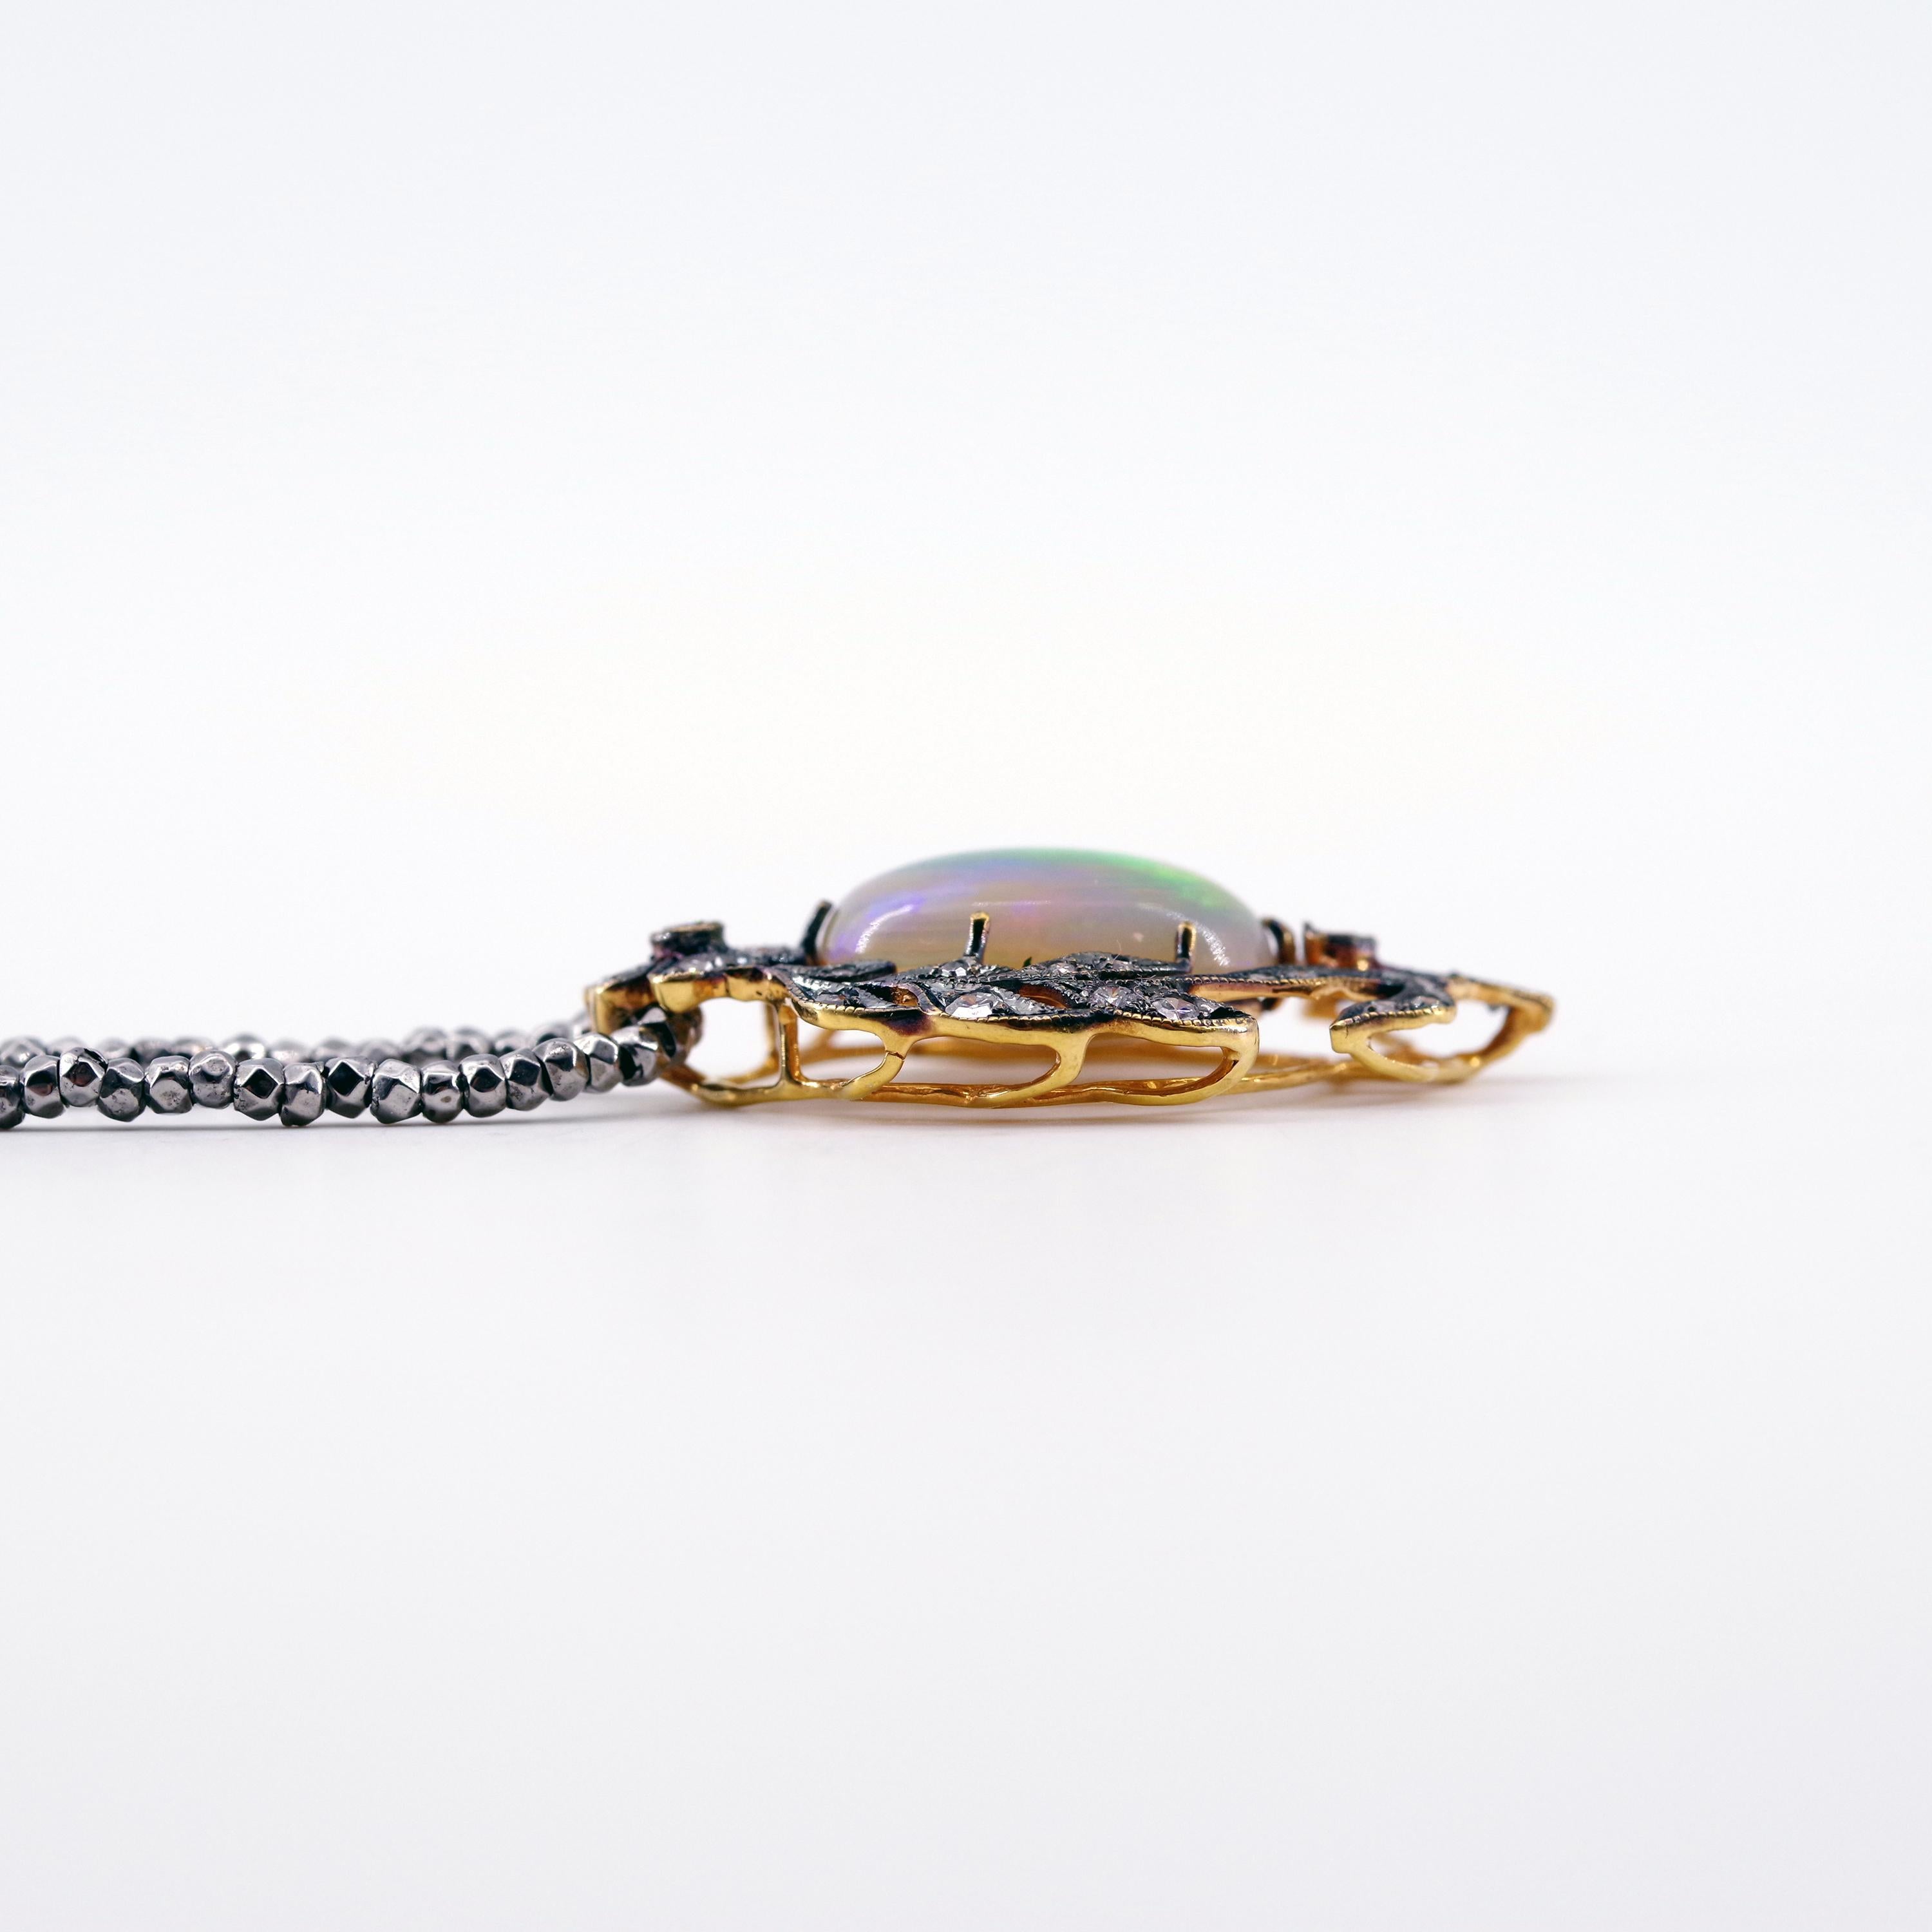 Victorian Opal and Diamond Pendant of Beguiling Beauty on Cut Steel Chain 14